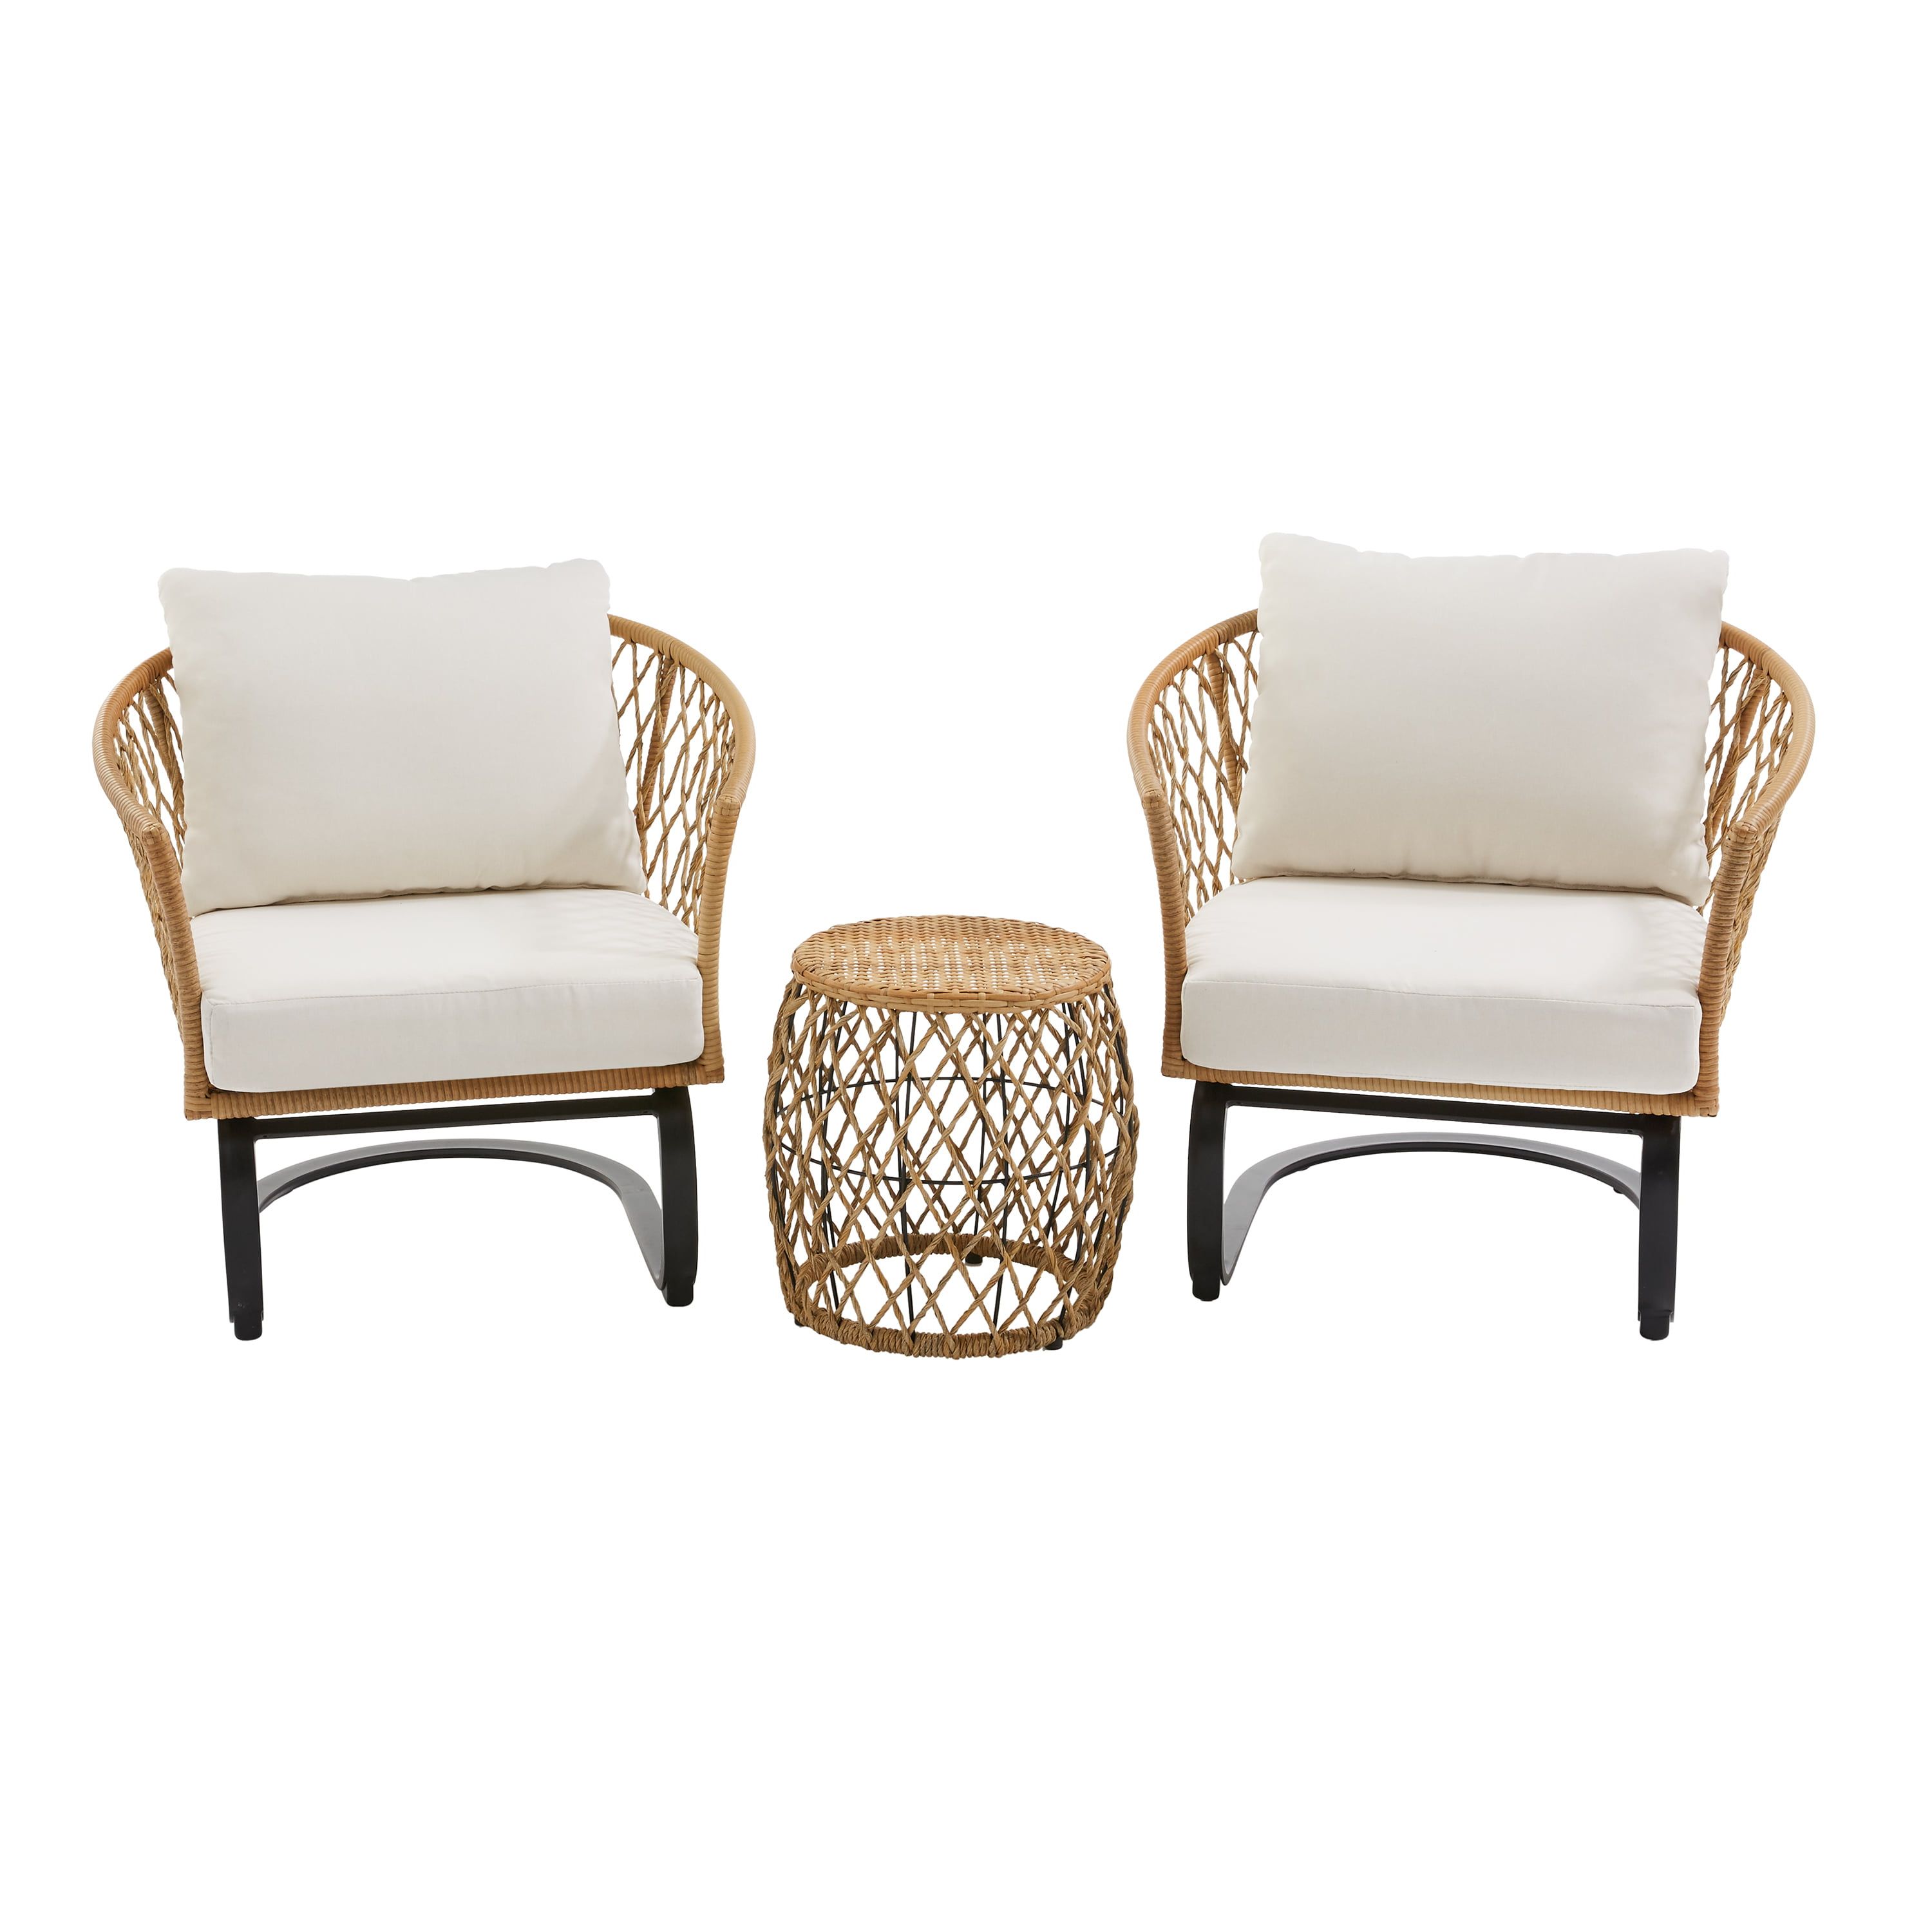 3 Piece Outdoor Boho Wicker Chat Set With Popular Better Homes & Gardens Ventura 3 Piece White Outdoor Boho Wicker Chat Set,  Wicker Frame – Walmart (Photo 1 of 15)